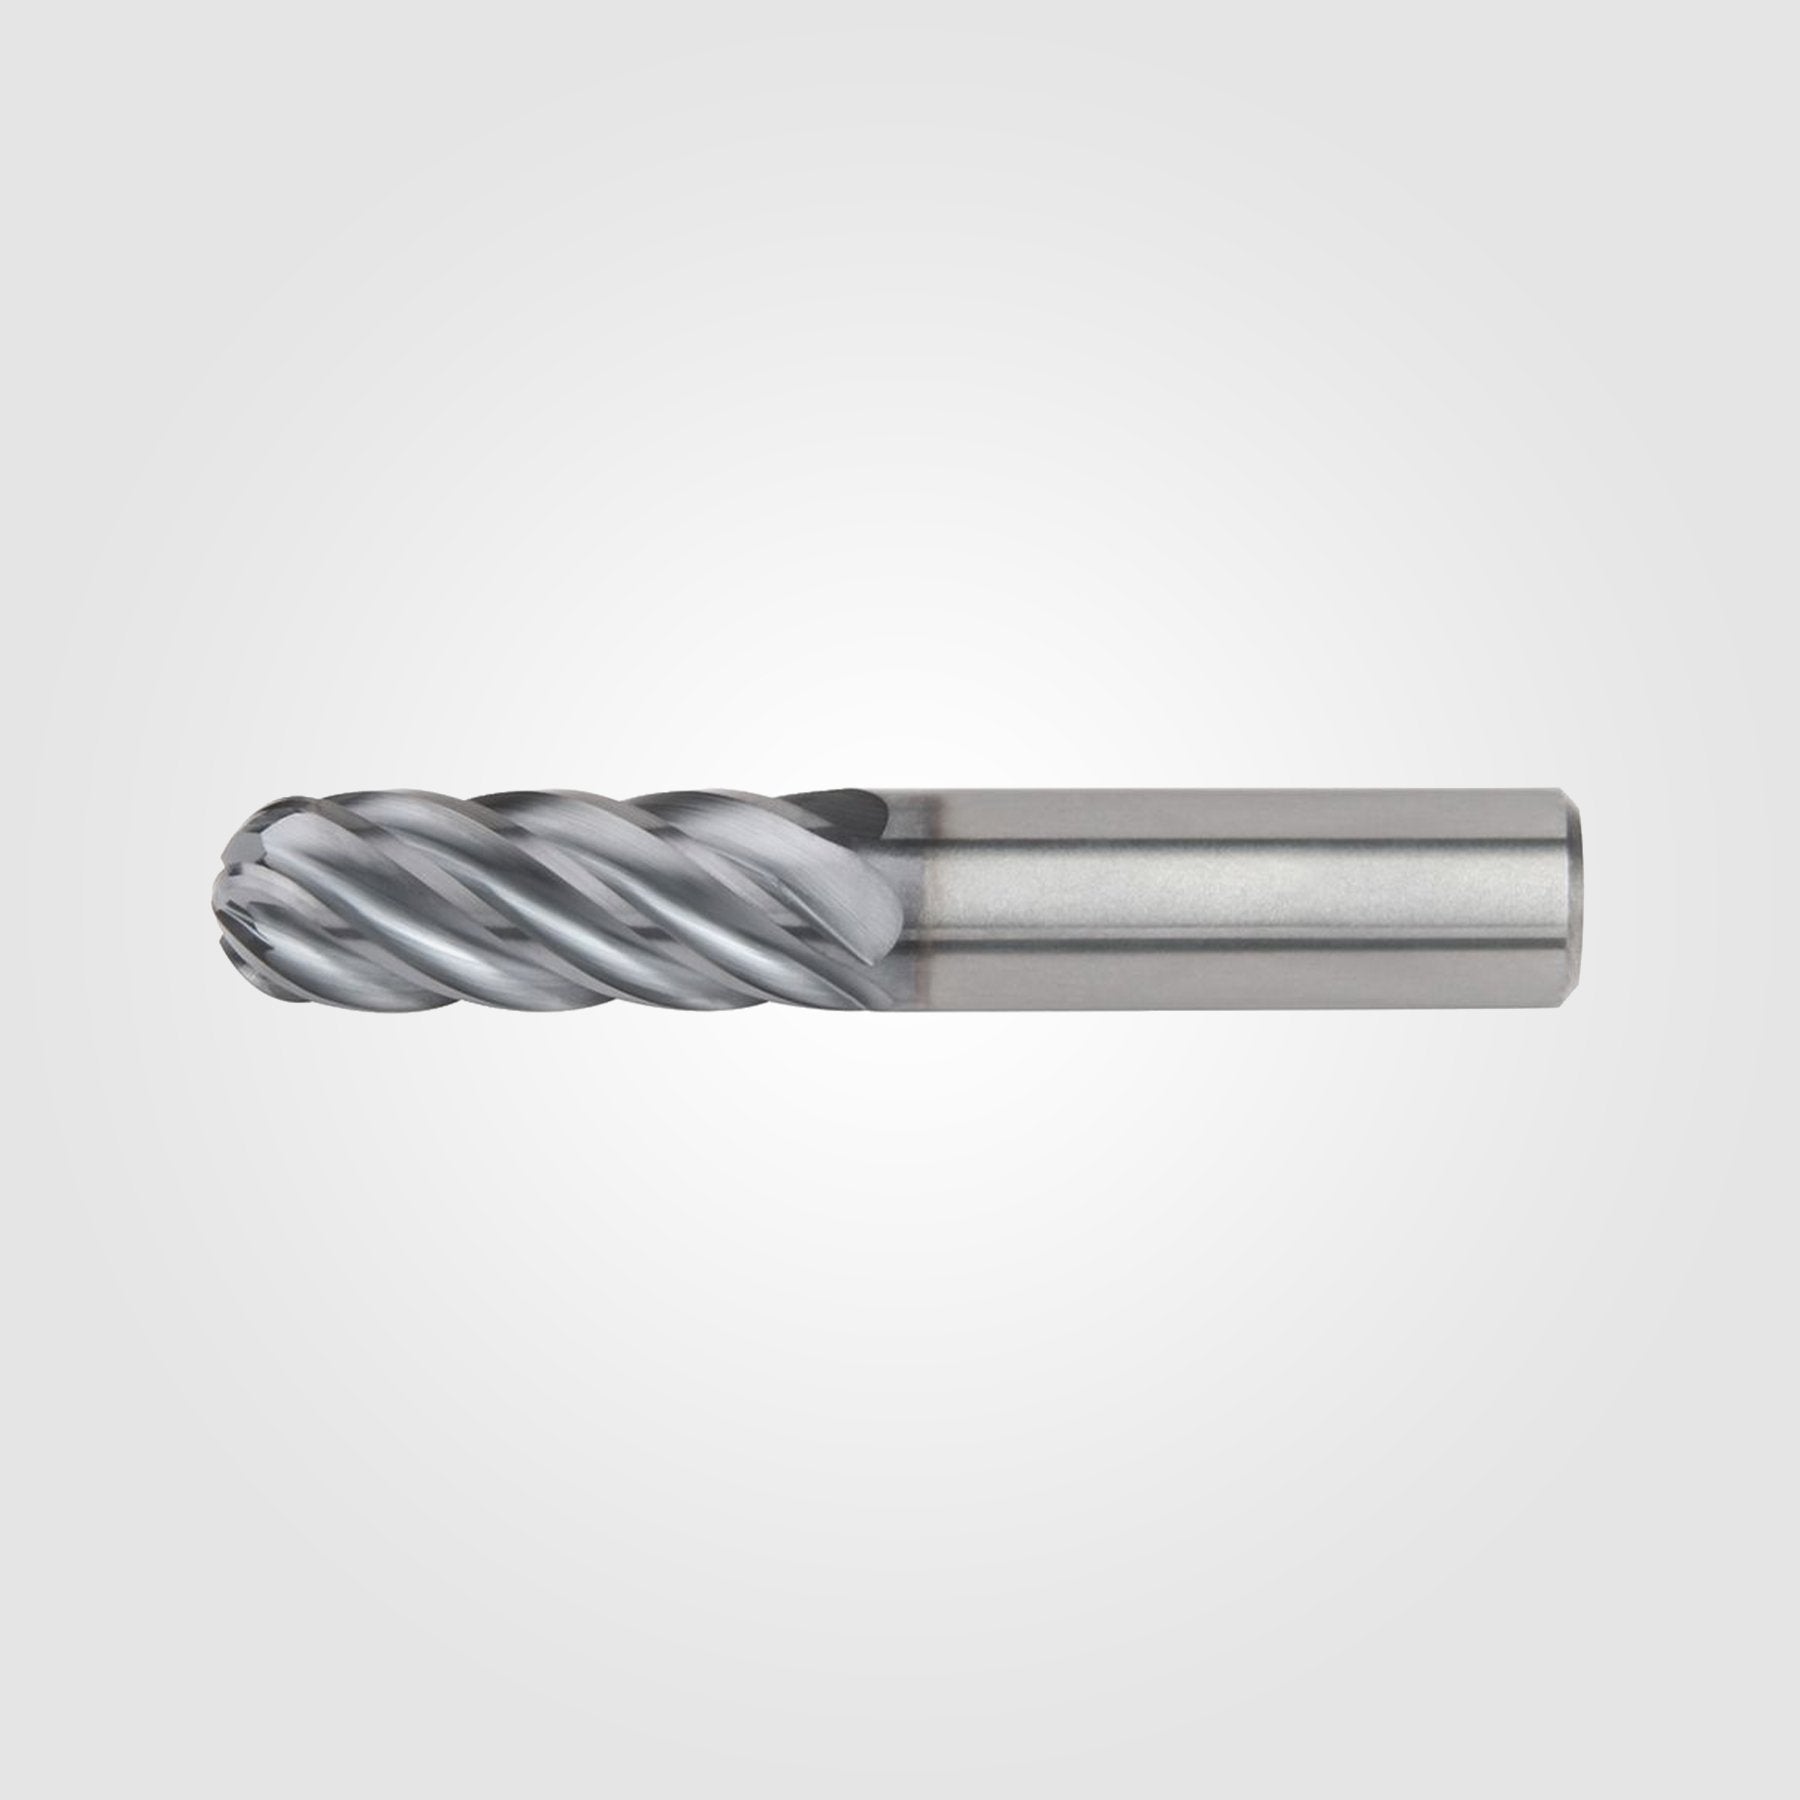 HARVI III (BALL NOSE AEROSPACE EXPANSION) | 1 1/4" x 1 1/4" x 5 1/2" x 8 1/2" | 6 FLUTE SOLID CARBIDE ENDMILL | 6114054